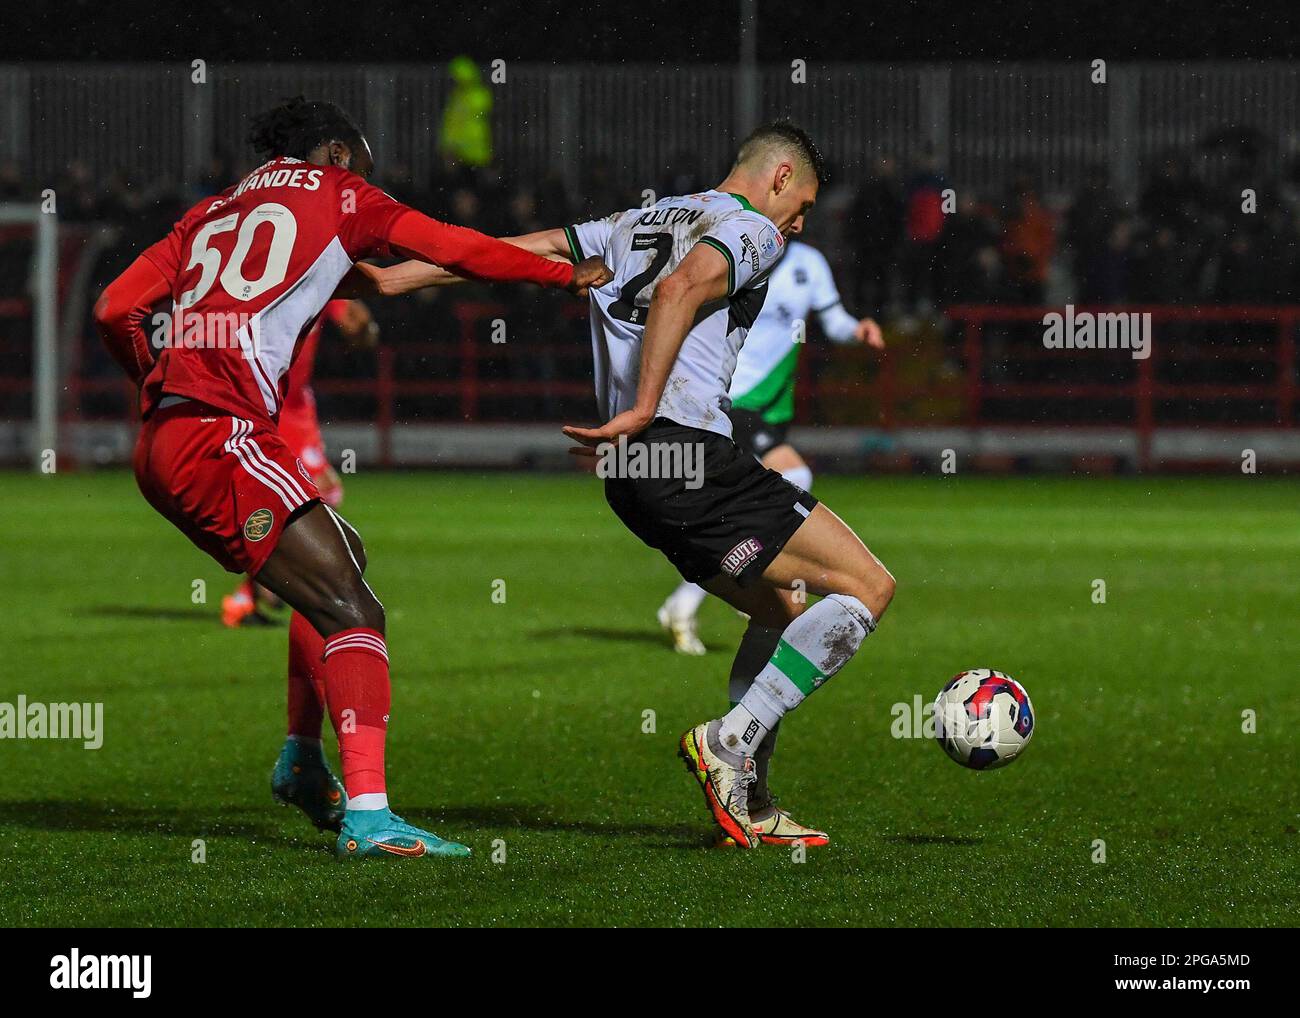 James Bolton #2 of Plymouth Argyle  shields the ball during the Sky Bet League 1 match Accrington Stanley vs Plymouth Argyle at Wham Stadium, Accrington, United Kingdom, 21st March 2023  (Photo by Stan Kasala/News Images) Stock Photo